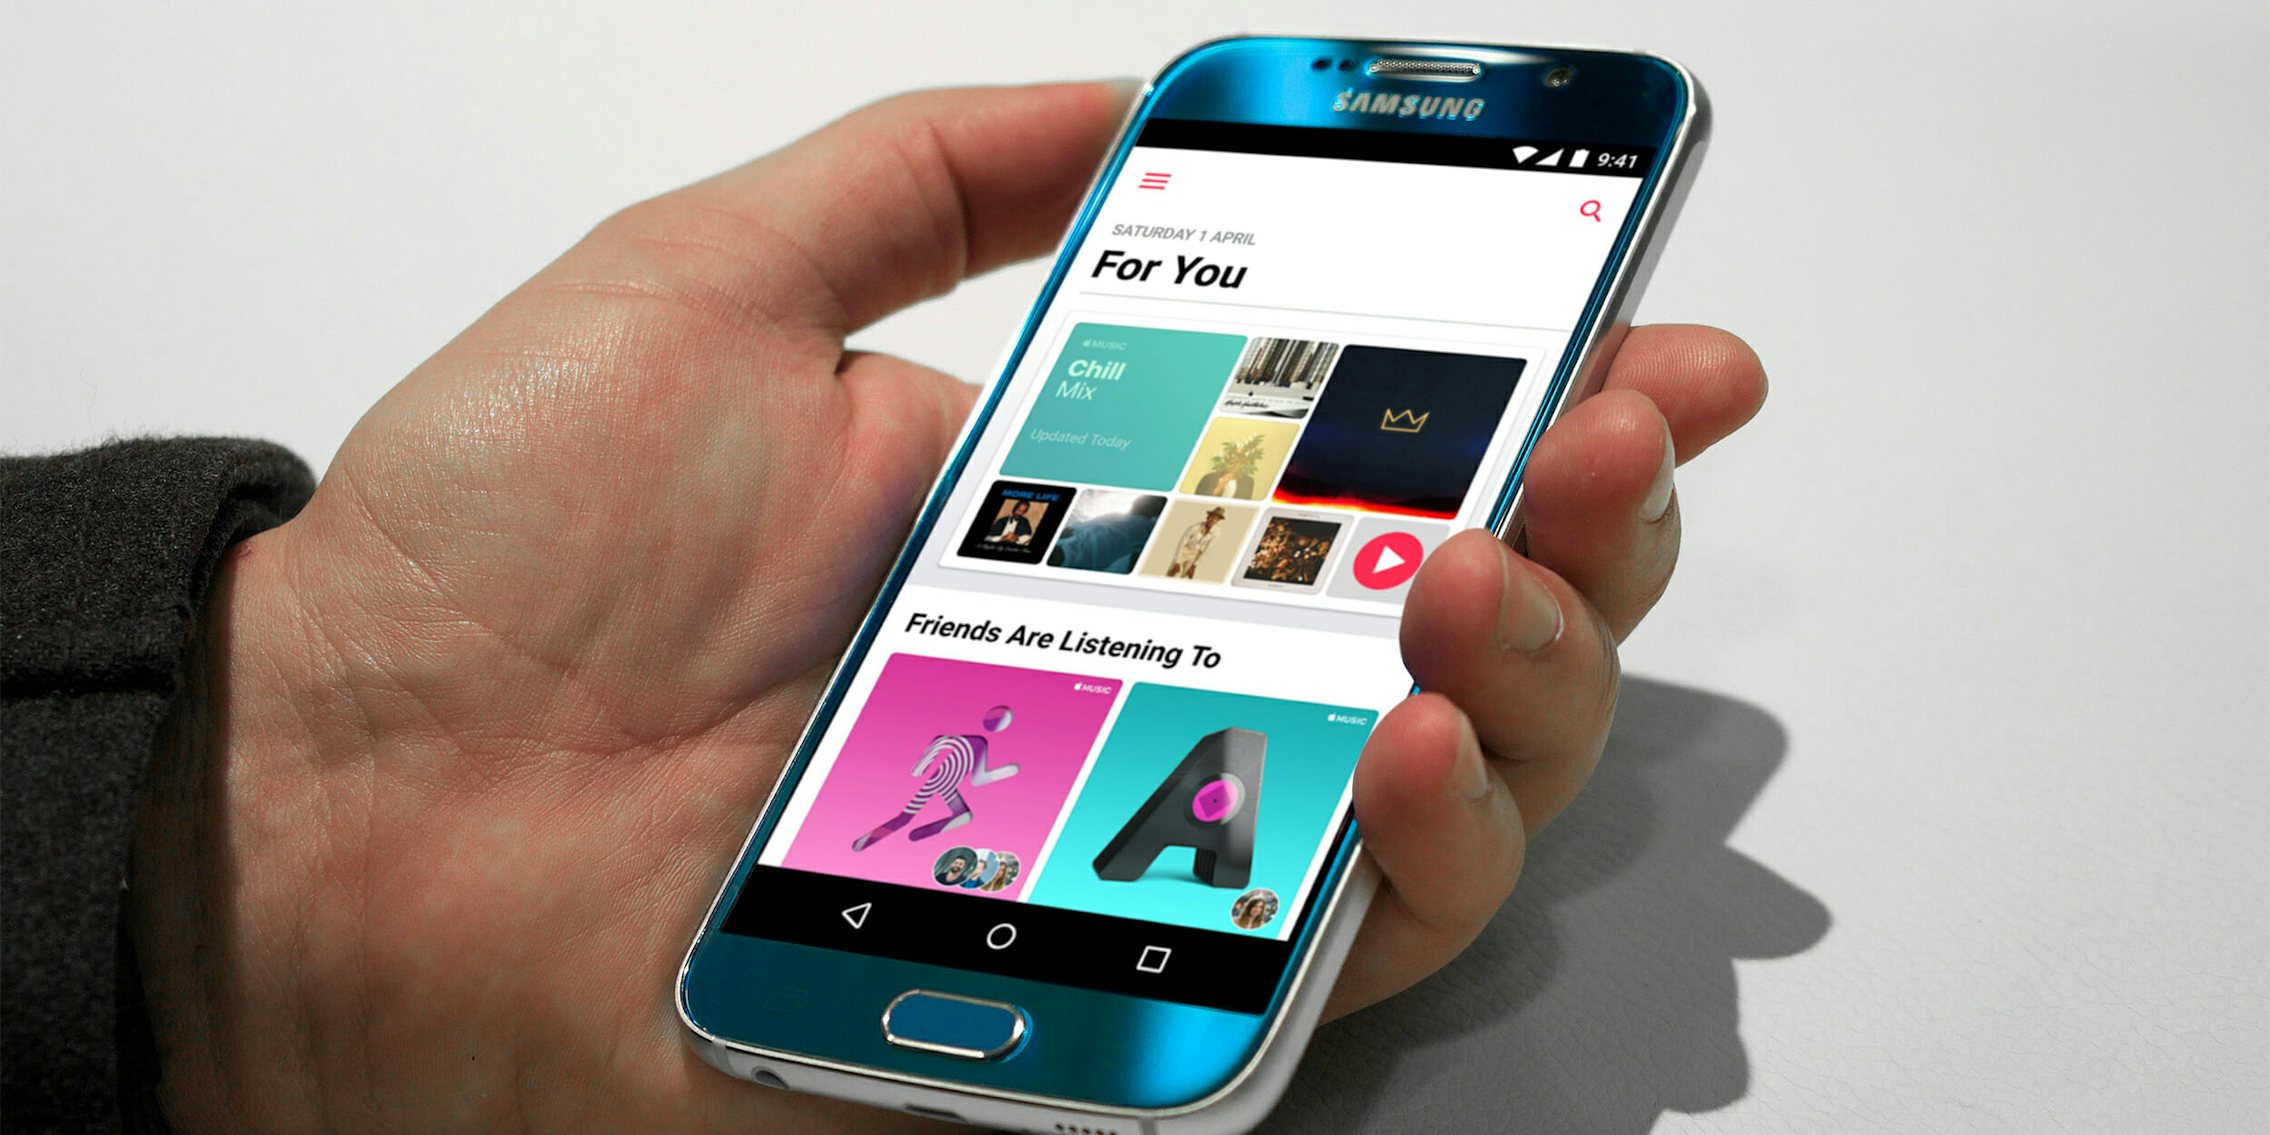 Apple Music on Android Samsung s6